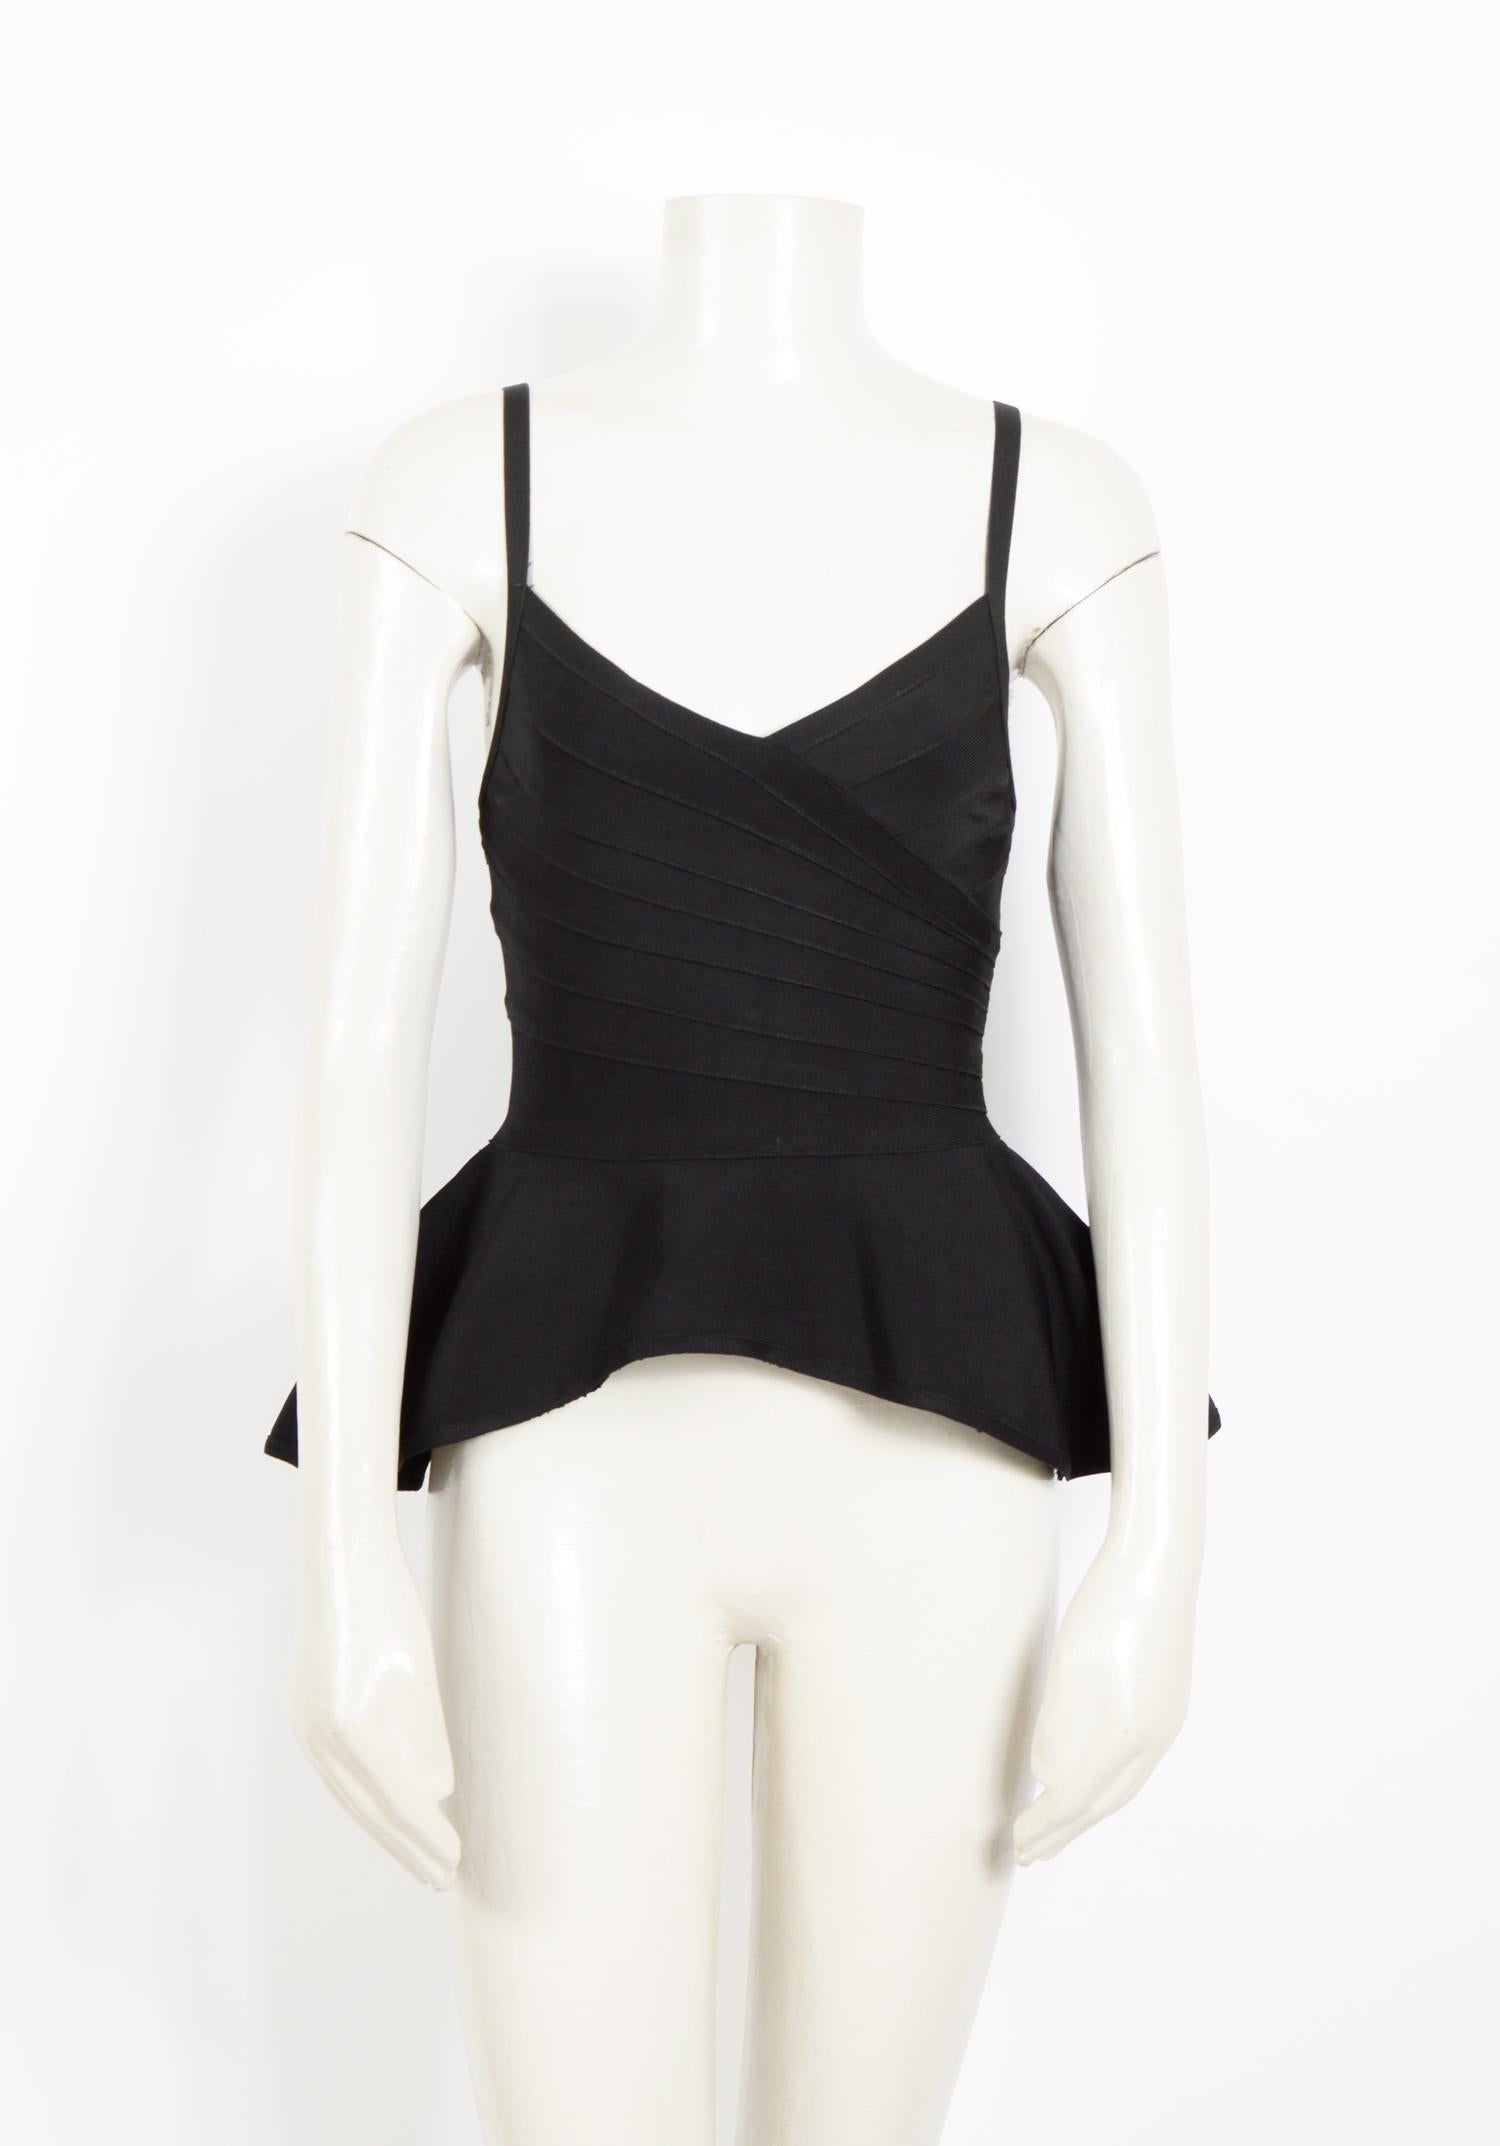 Vintage Herve Leger is always a good idea. Especially this vintage black bandage stretch top with basque that would look great on trousers or a skirt
Size M
Measurements are taken flat:
Ua to Ua 14inch/36cm(x2) - Waist 12inch/31cm(x2)
